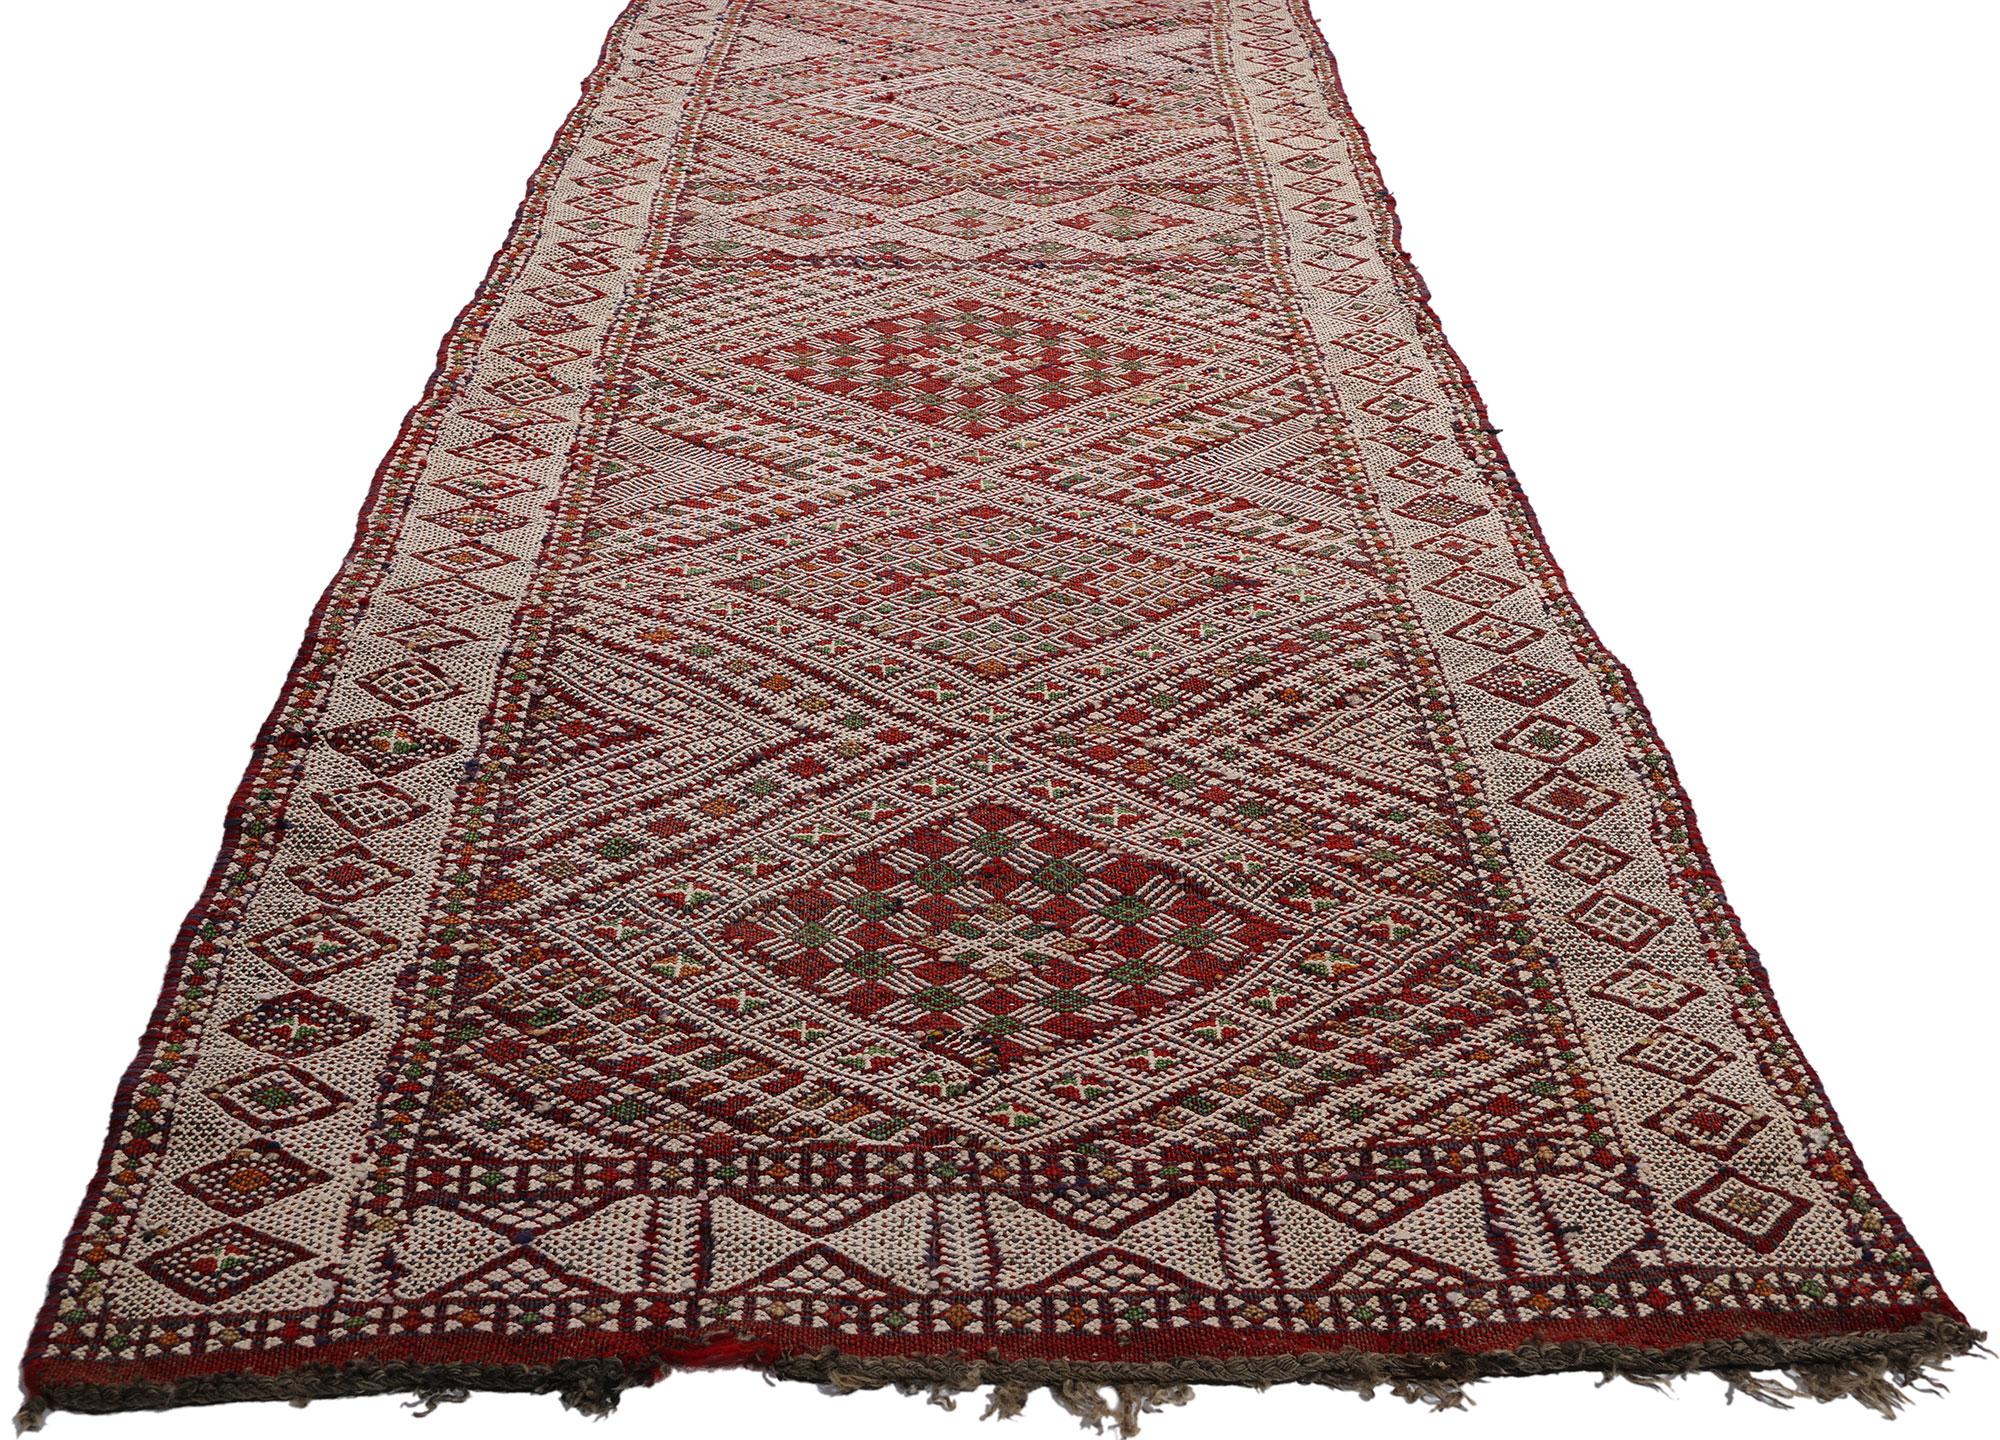 21844 Vintage Zemmour Moroccan Hanbel Rug, 02'09 x 23'10. Introducing our exquisite handwoven wool hanbel rug, a captivating extra-long Moroccan kilim runner hailing from the skilled artisans of the Zemmour Tribe in the Middle Atlas Mountains of